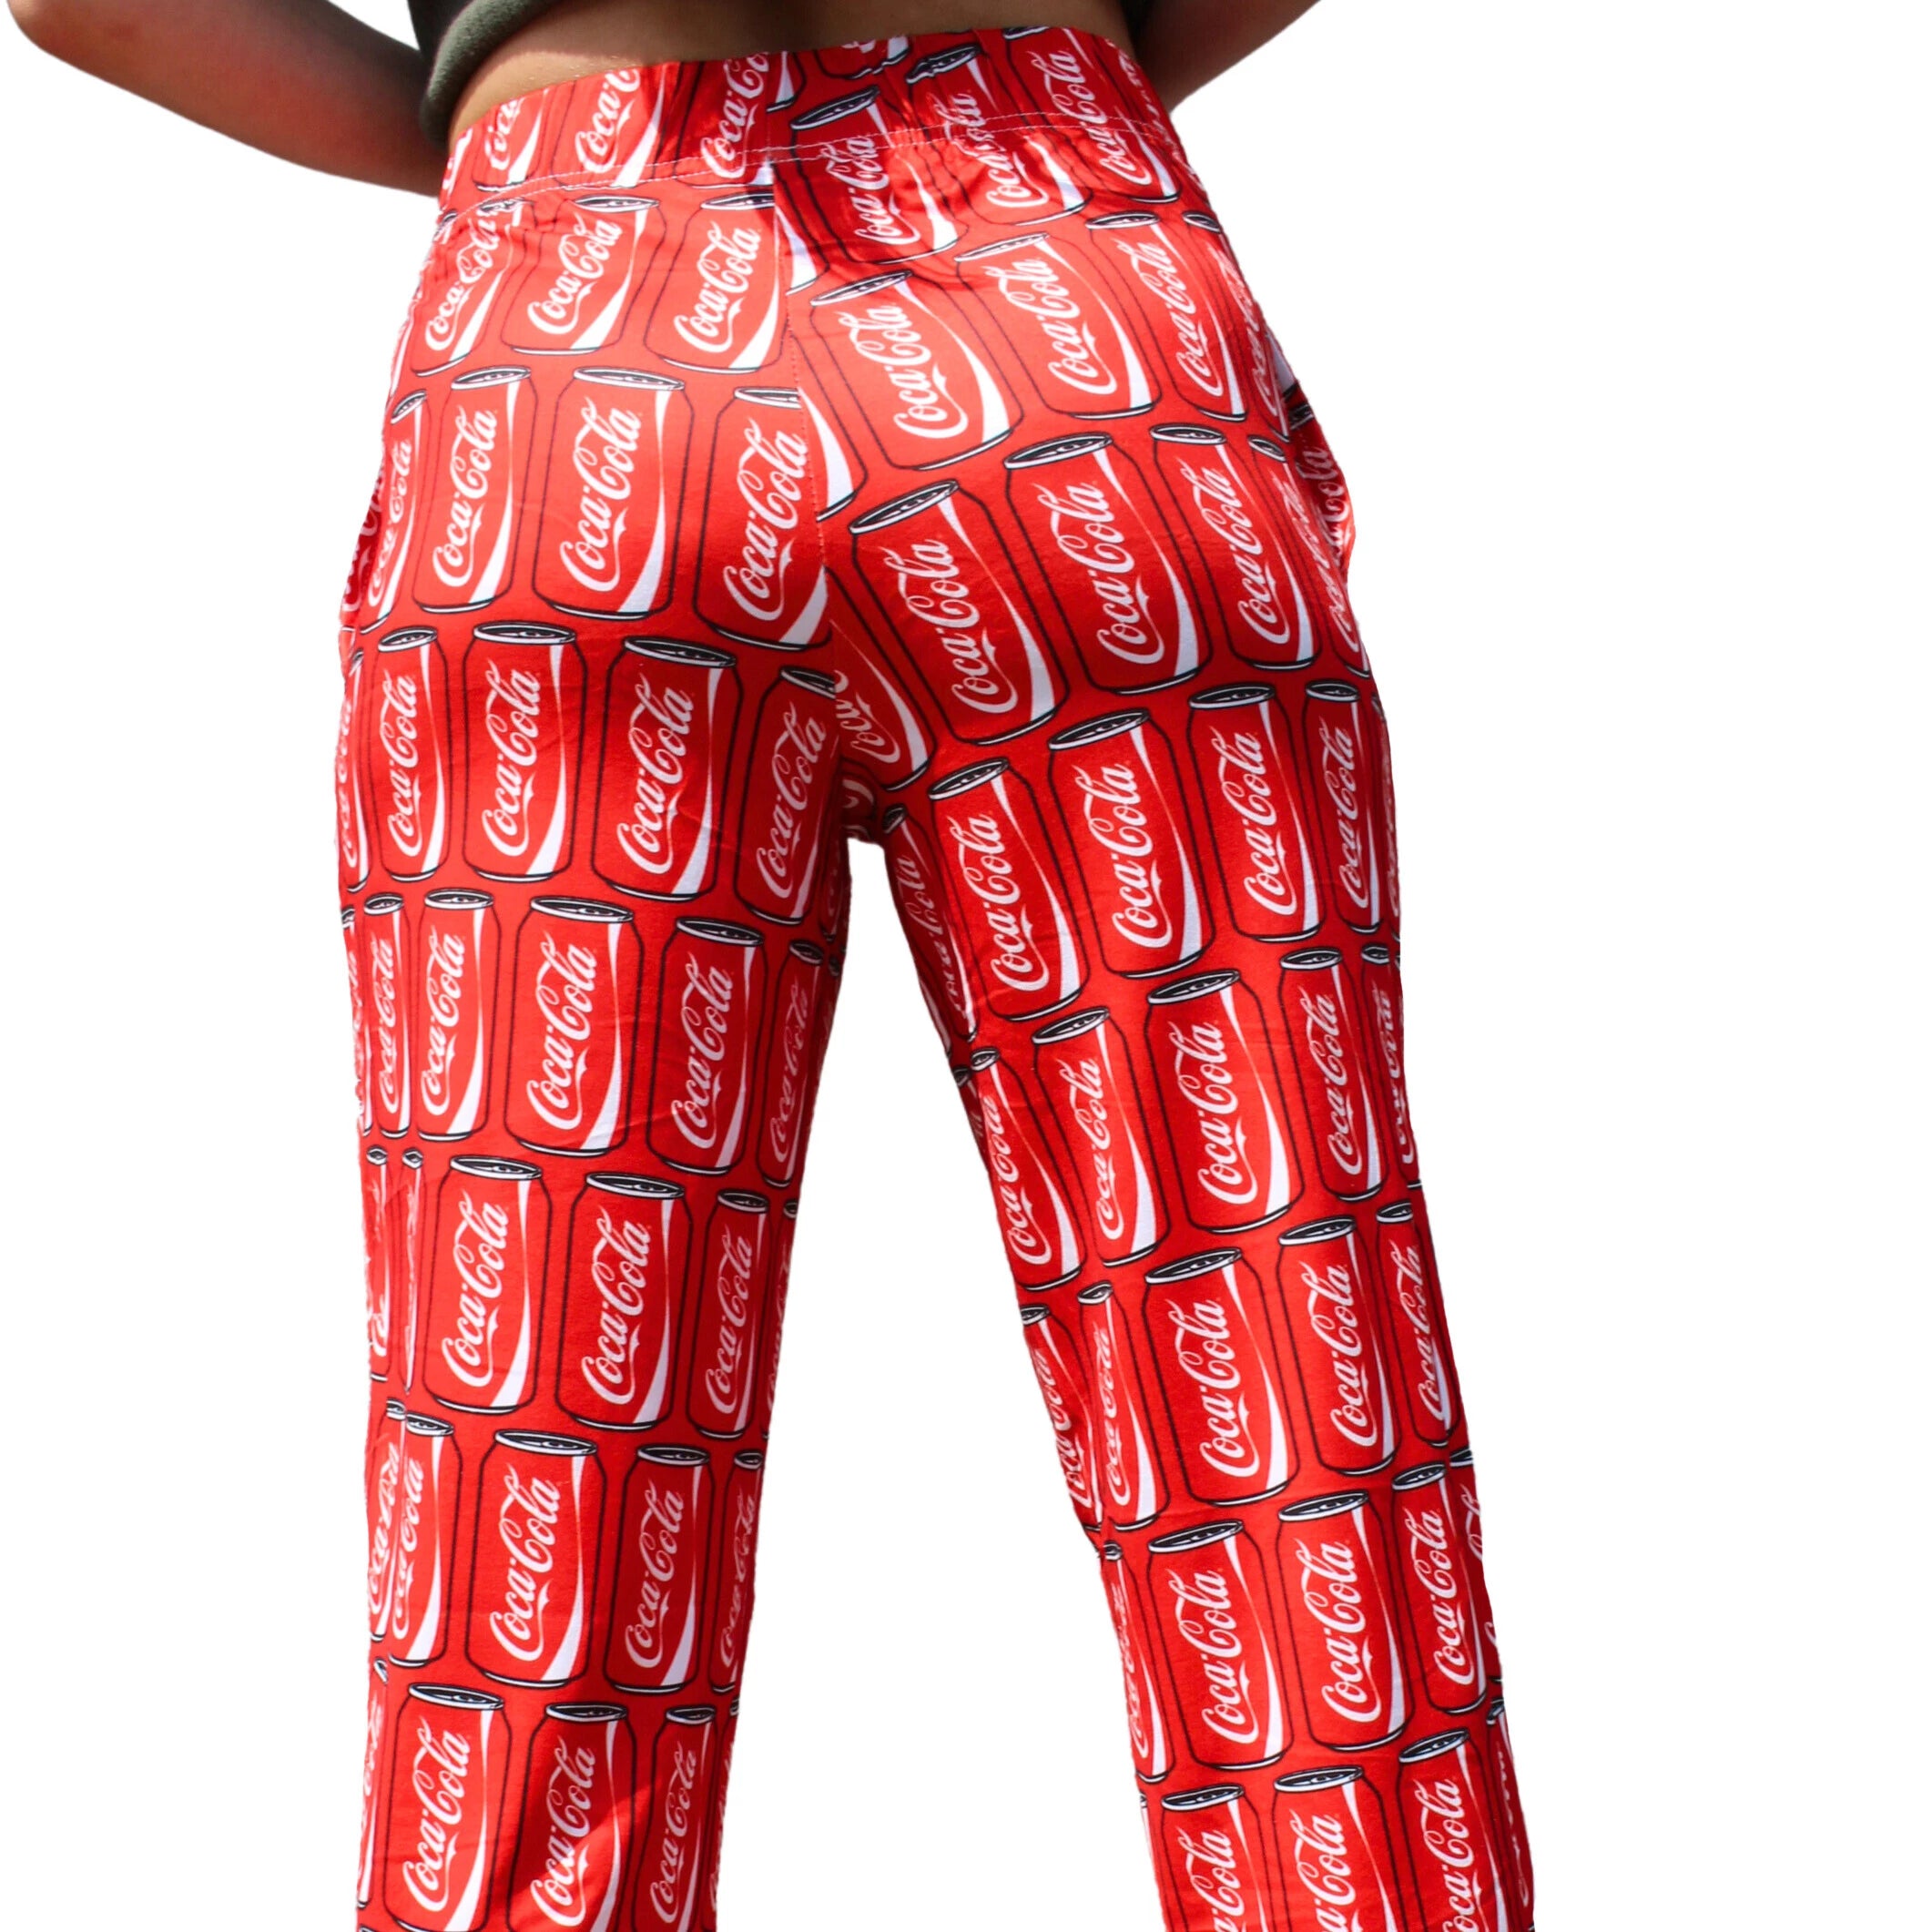 Brief Insanity Coca Cola Can Pattern Pants on model back view